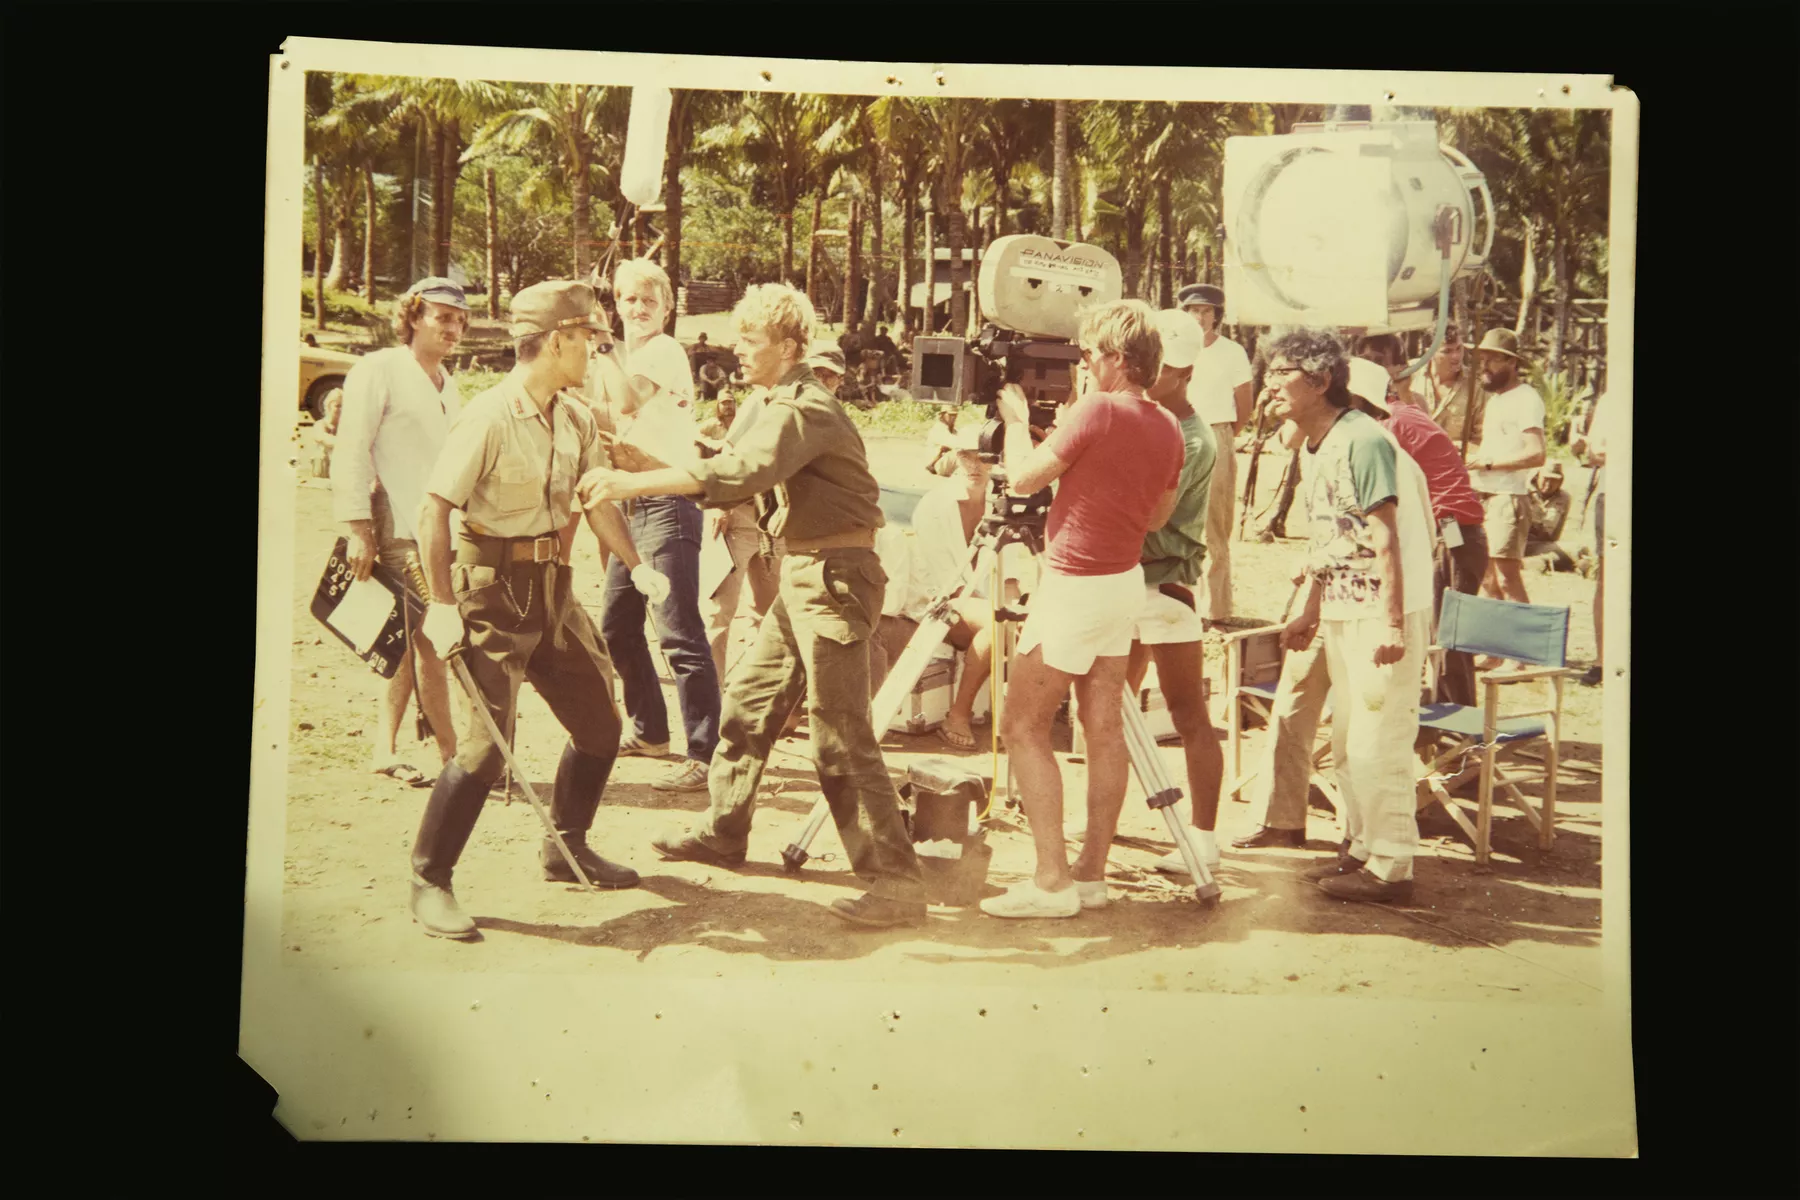 On set of Merry Christmas Mr lawrence 1980s